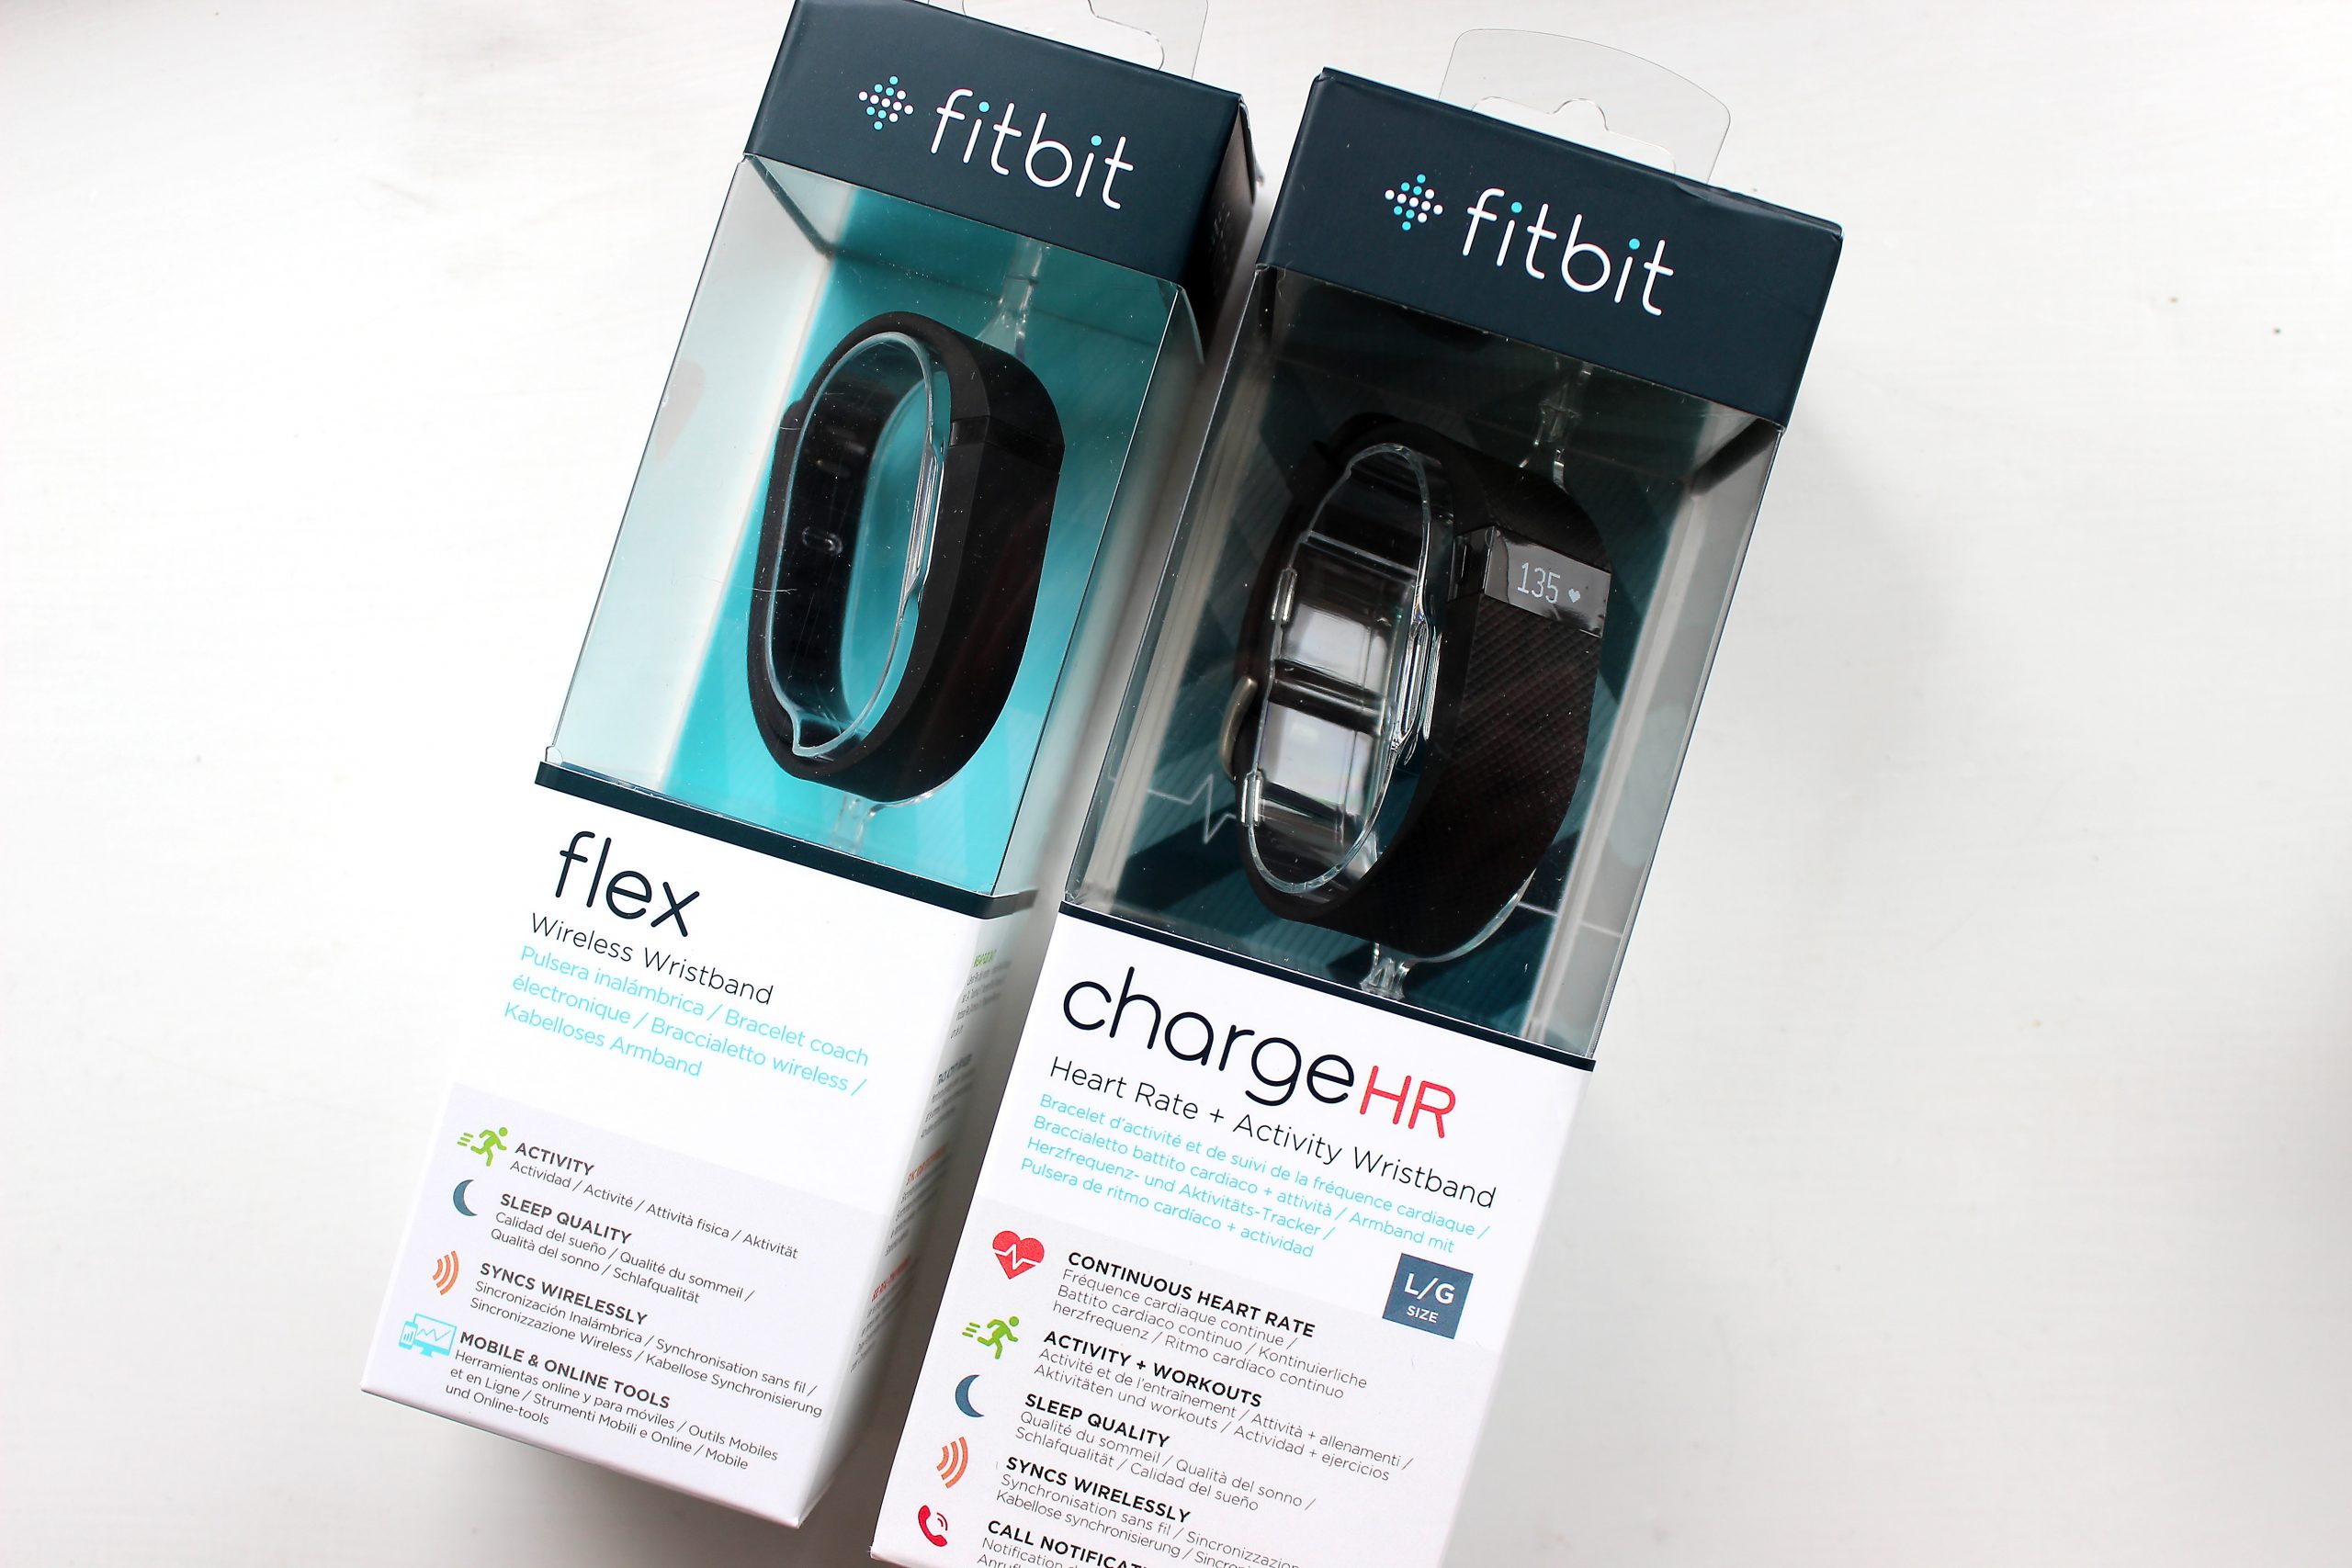 Fitbit Charge HR Review, Fitbit Flex Review